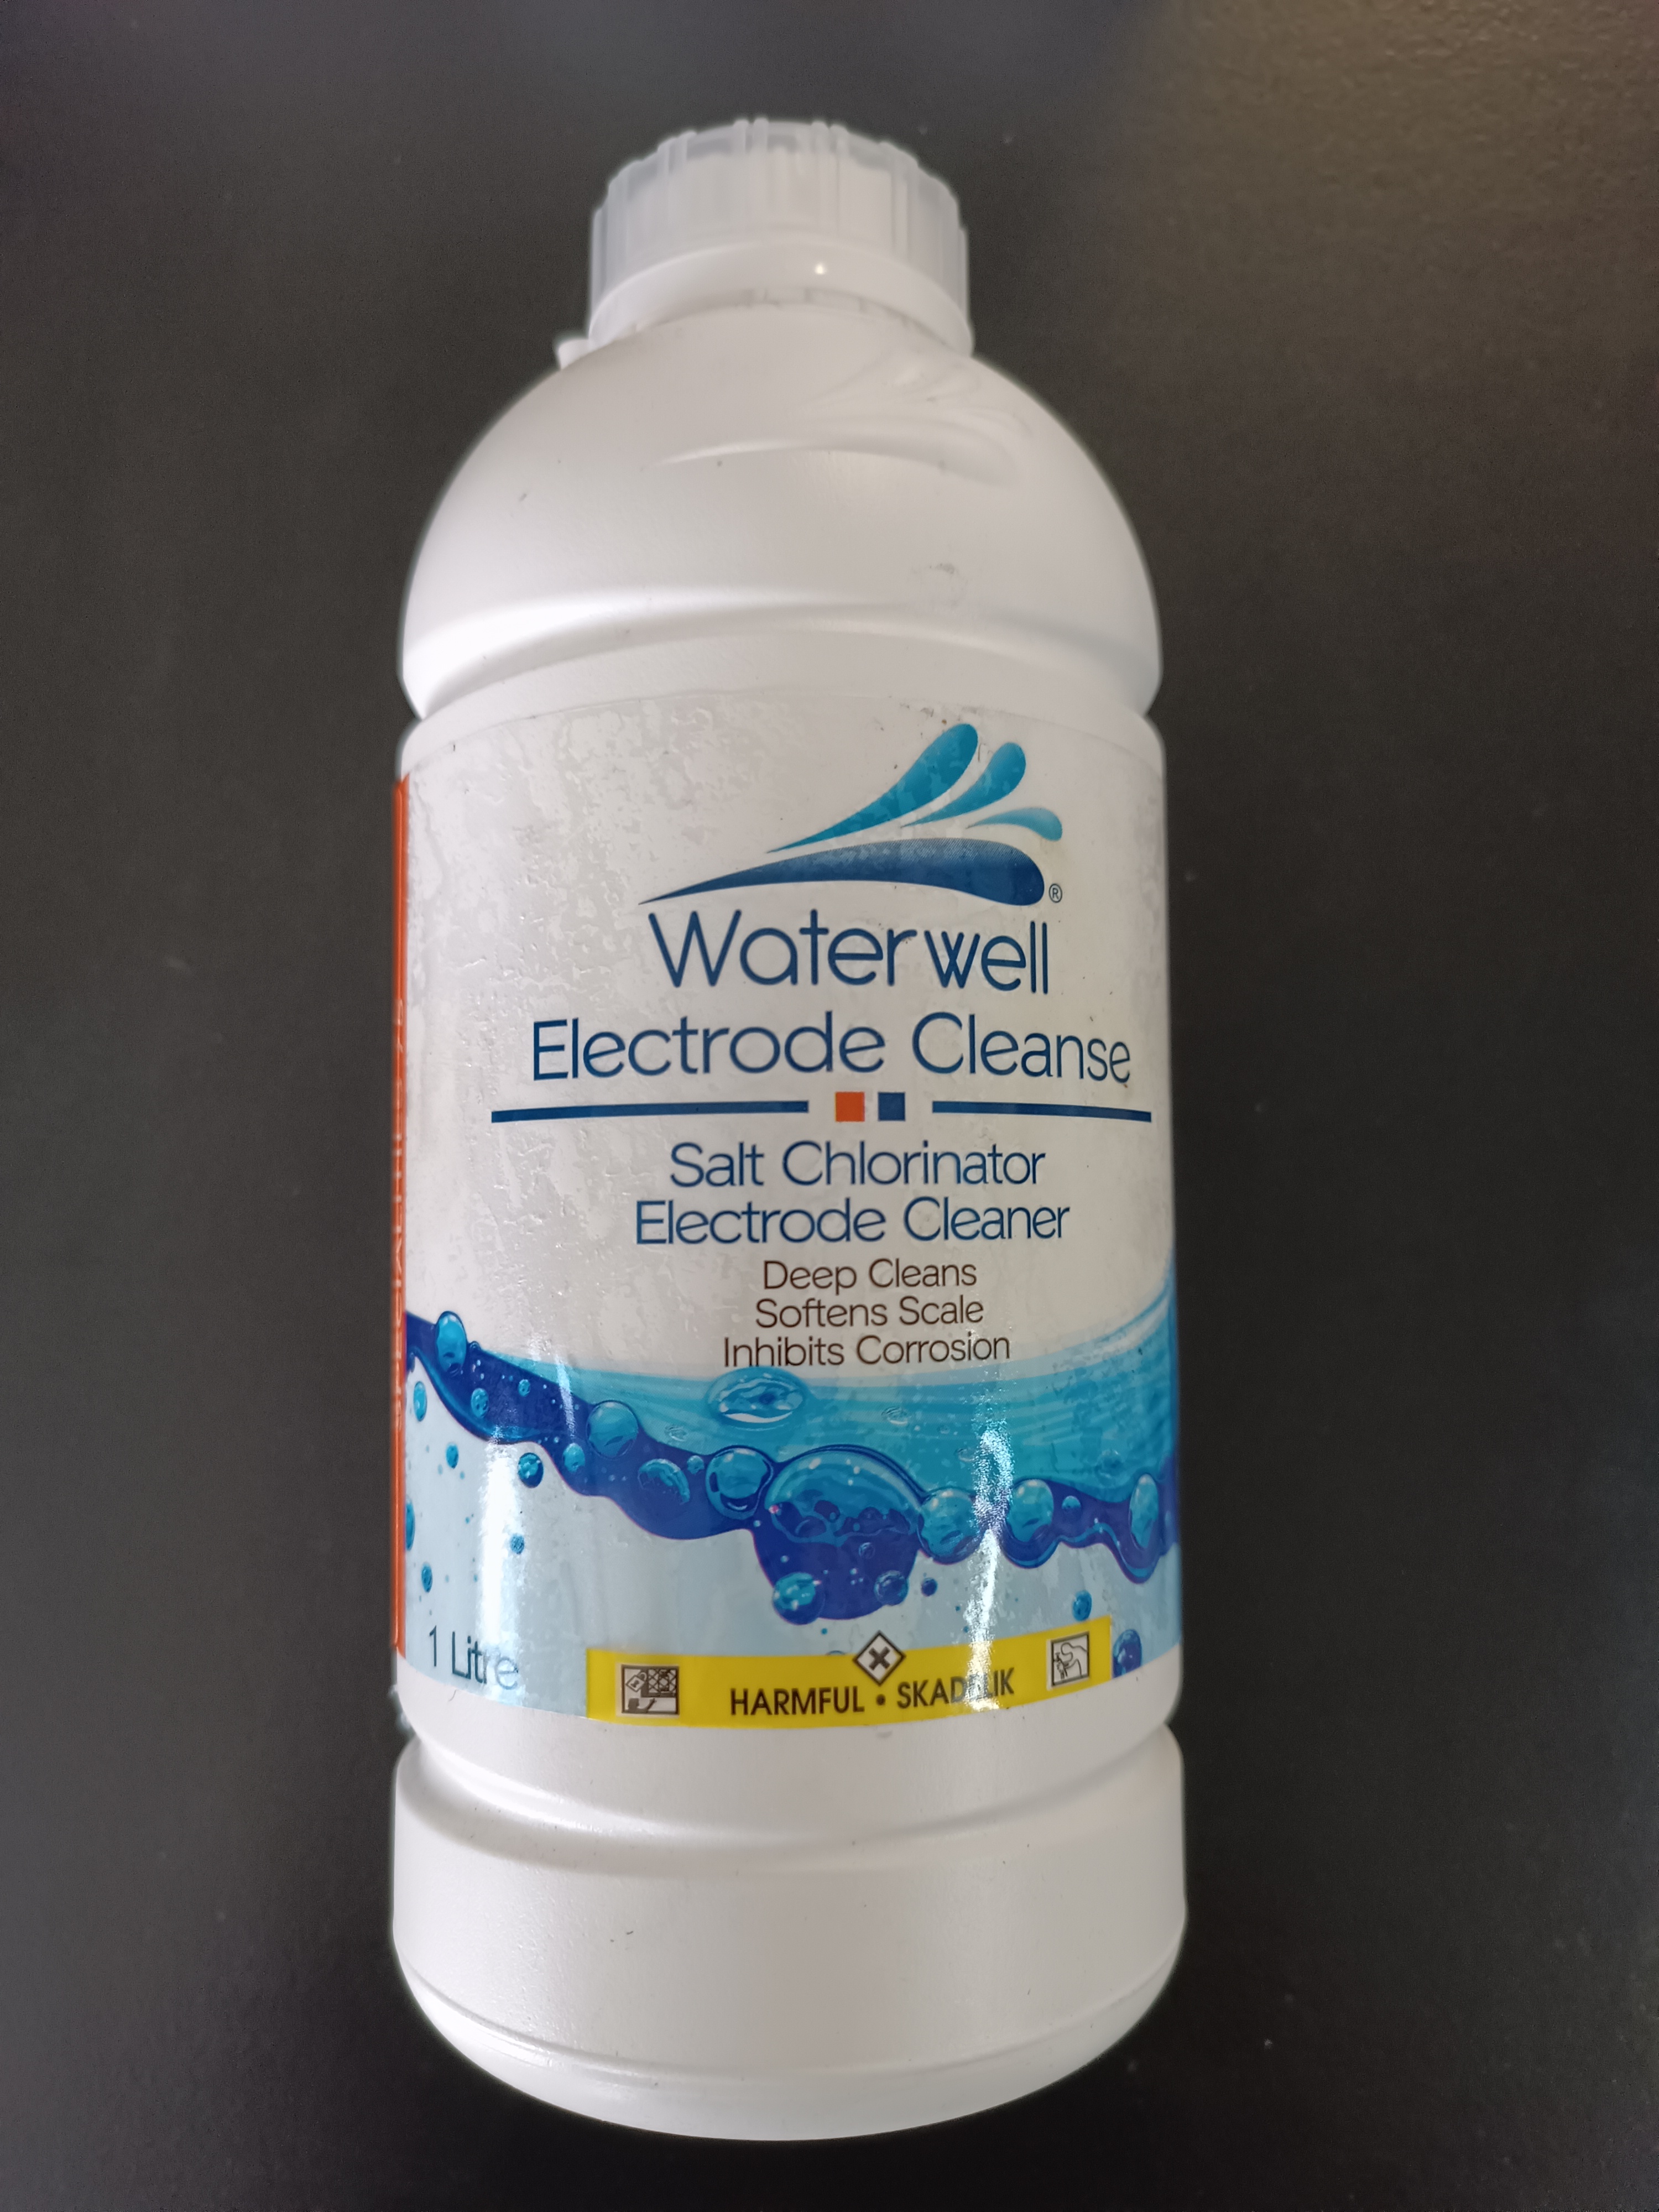 waterwell-electrode-cleanse-1ltr